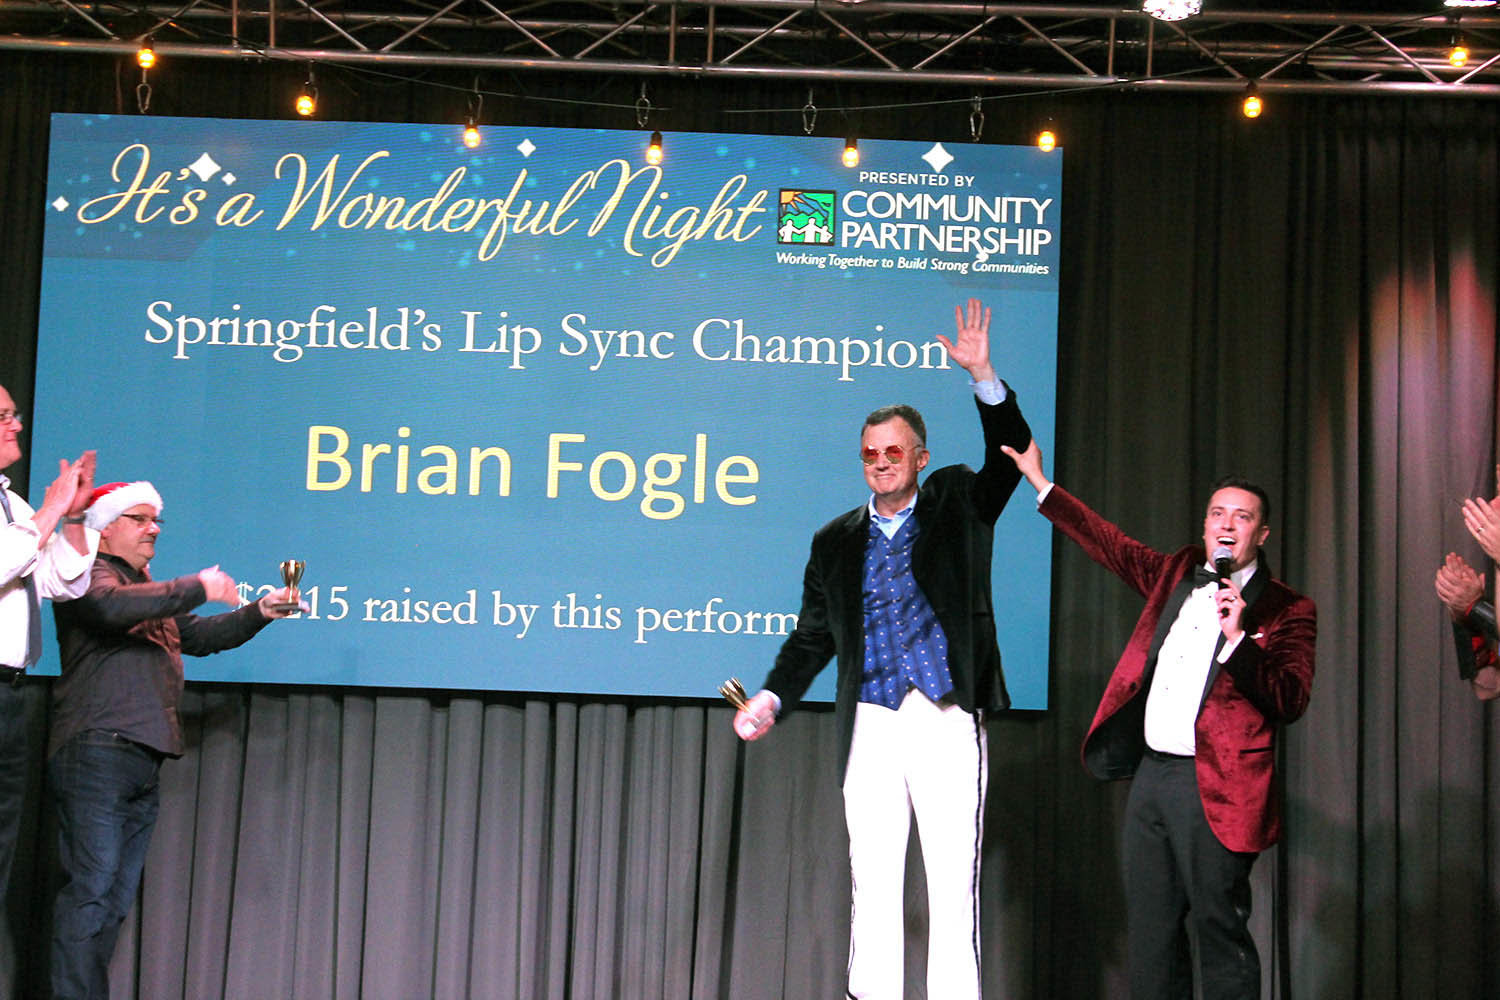 ‘SWEET CAROLINE’
Brian Fogle, CEO of Community Foundation of the Ozarks, is crowned Springfield Lip Sync Champion during Community Partnership of the Ozarks’ It’s a Wonderful Night fundraiser Dec. 6. Other participants included Stephen Hall of Springfield Public Schools, David Pennington of the Springfield Fire Department, Cora Scott of the city of Springfield, Clif Smart of Missouri State University and Paul Williams of the Springfield Police Department. The lip sync battles generated $8,300 worth of votes, with the final between Fogle and Smart bringing in $4,000 in donations. Fogle’s winning song was “Sweet Caroline.”